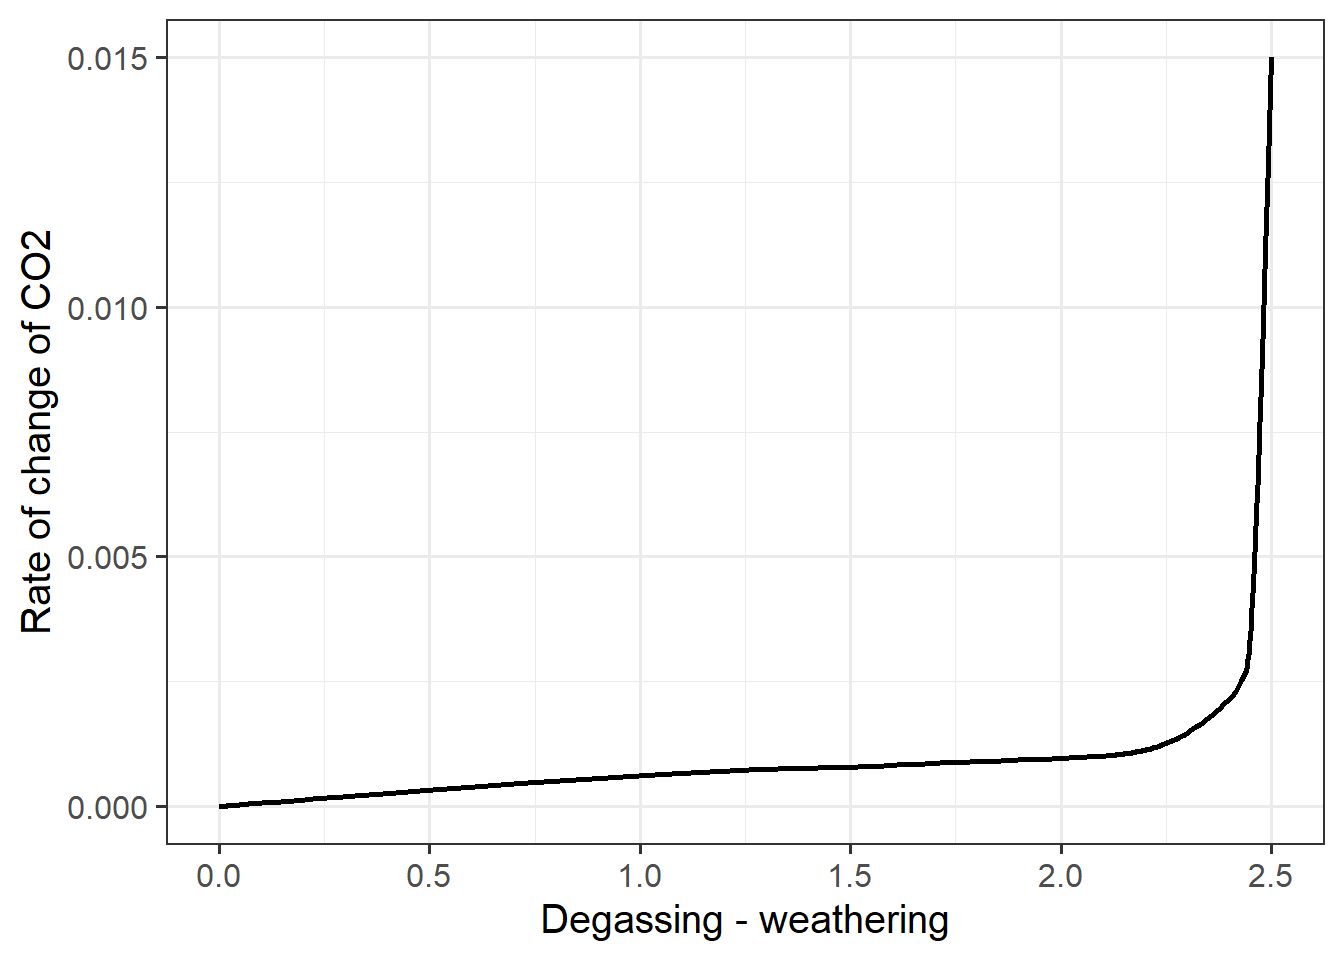 The rate of change in atmospheric CO2 versus the difference between the degassing rate and the weathering rate